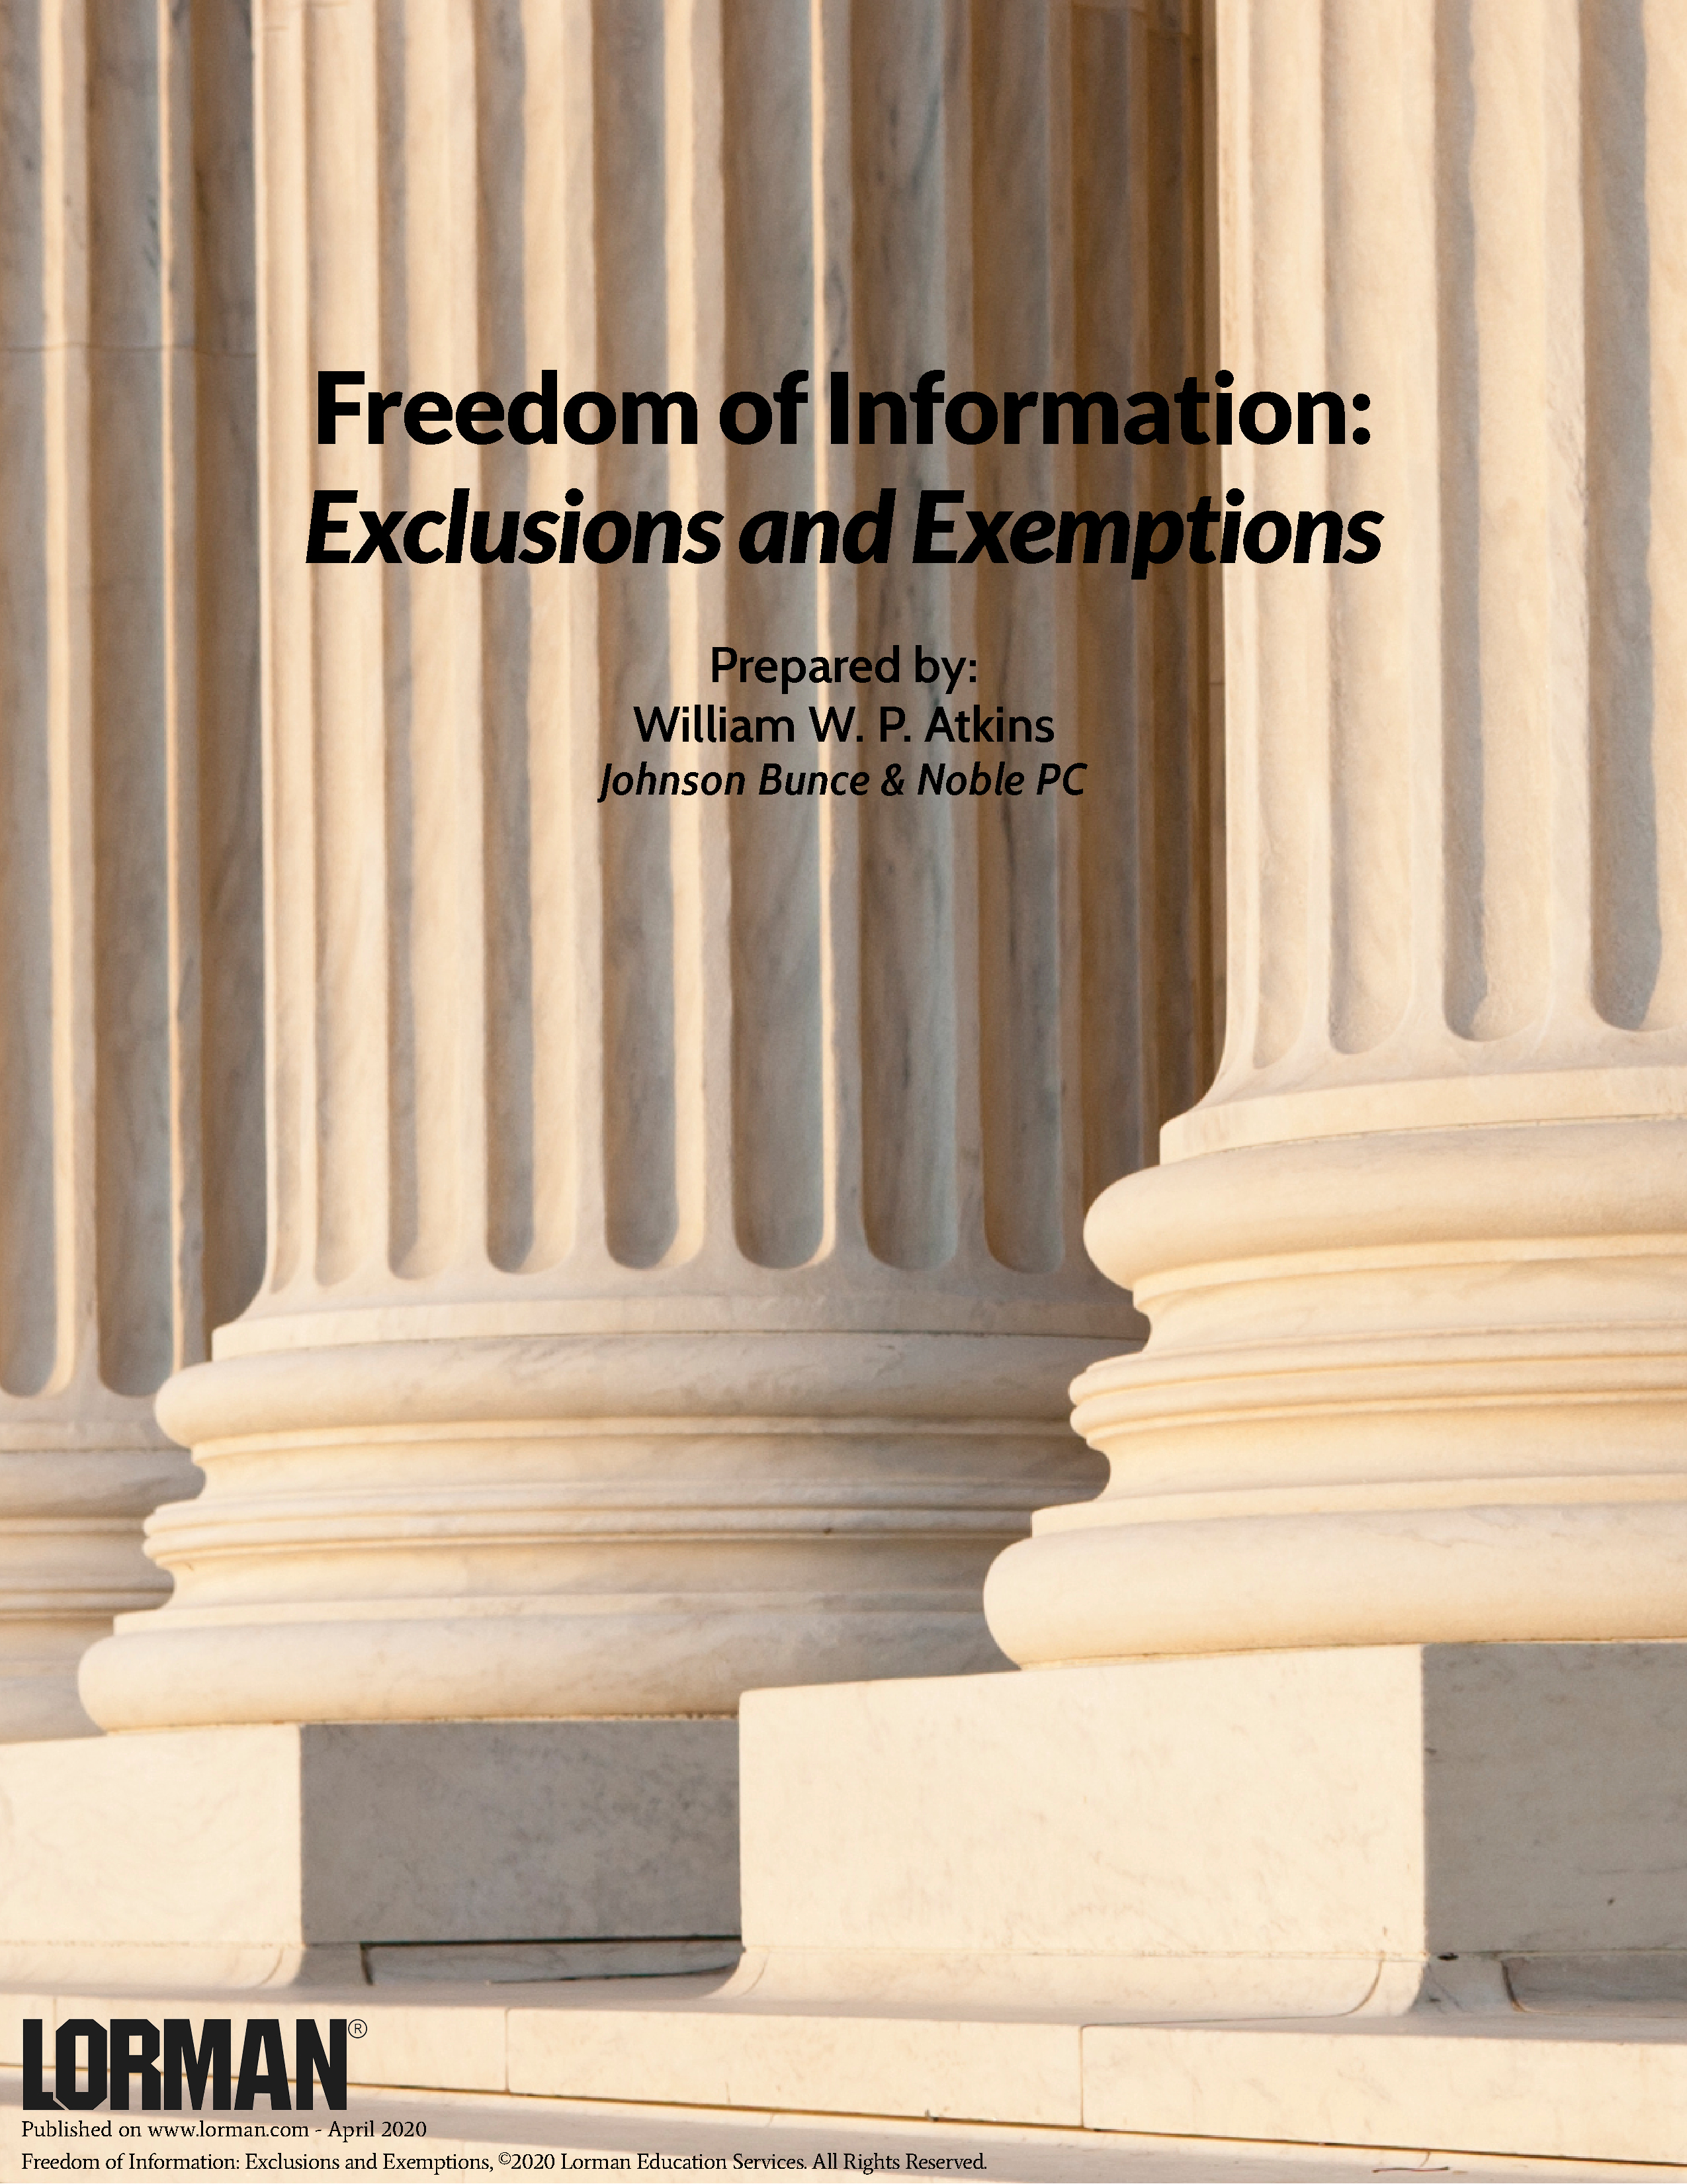 Freedom of Information - Exclusions and Exemptions